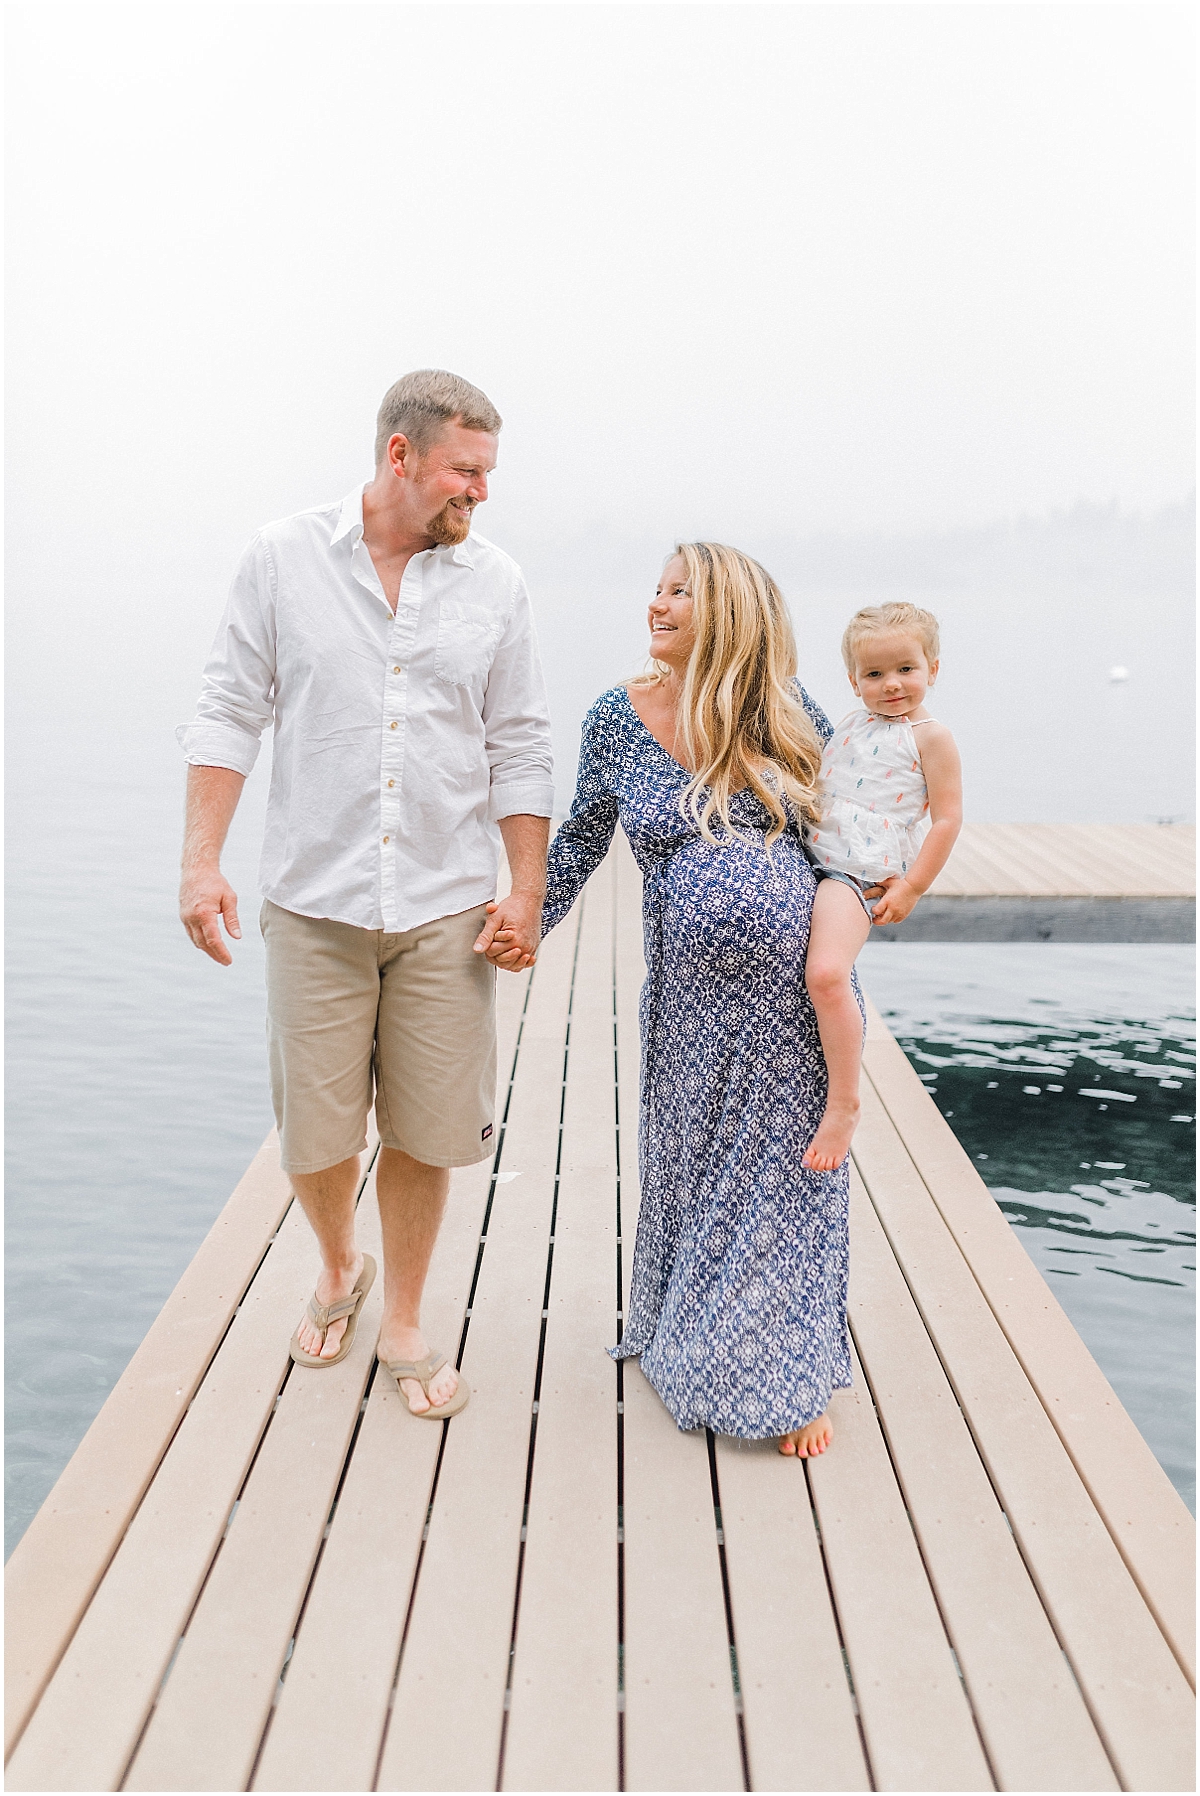 Emma Rose Company | PNW Family Portrait Photographer | Light and Airy Photography Style | What to Wear to Family Pictures | Kindred Presets | Lake Chelan Wedding Portrait Photographer_0099.jpg